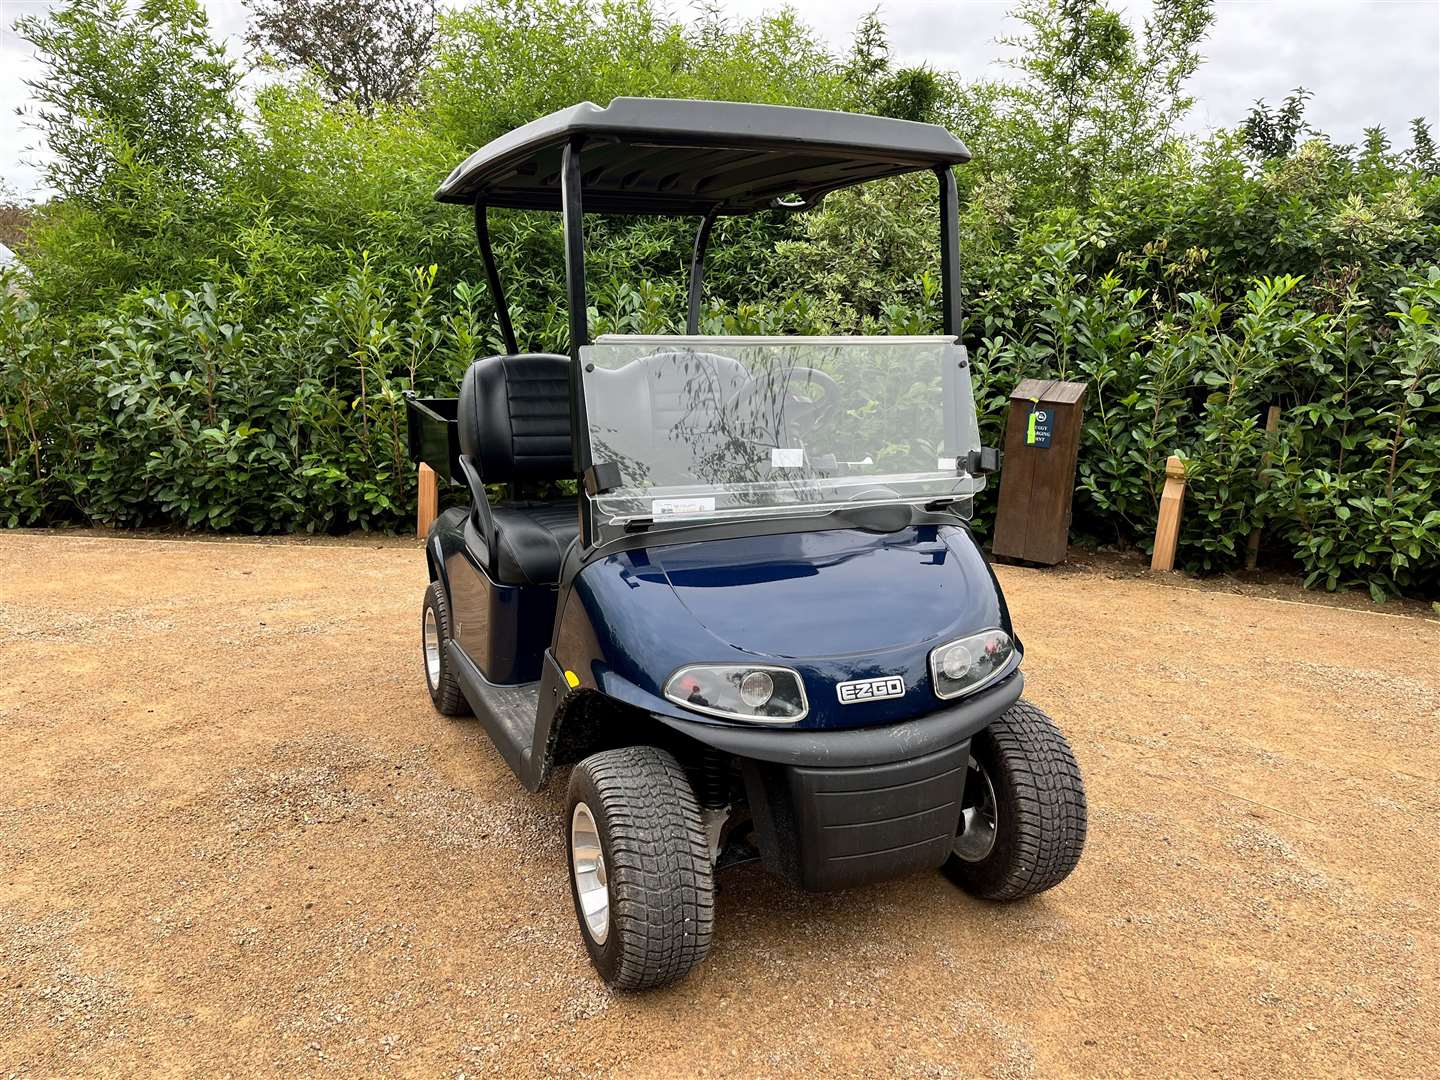 The electric golf buggy we had use of during our stay